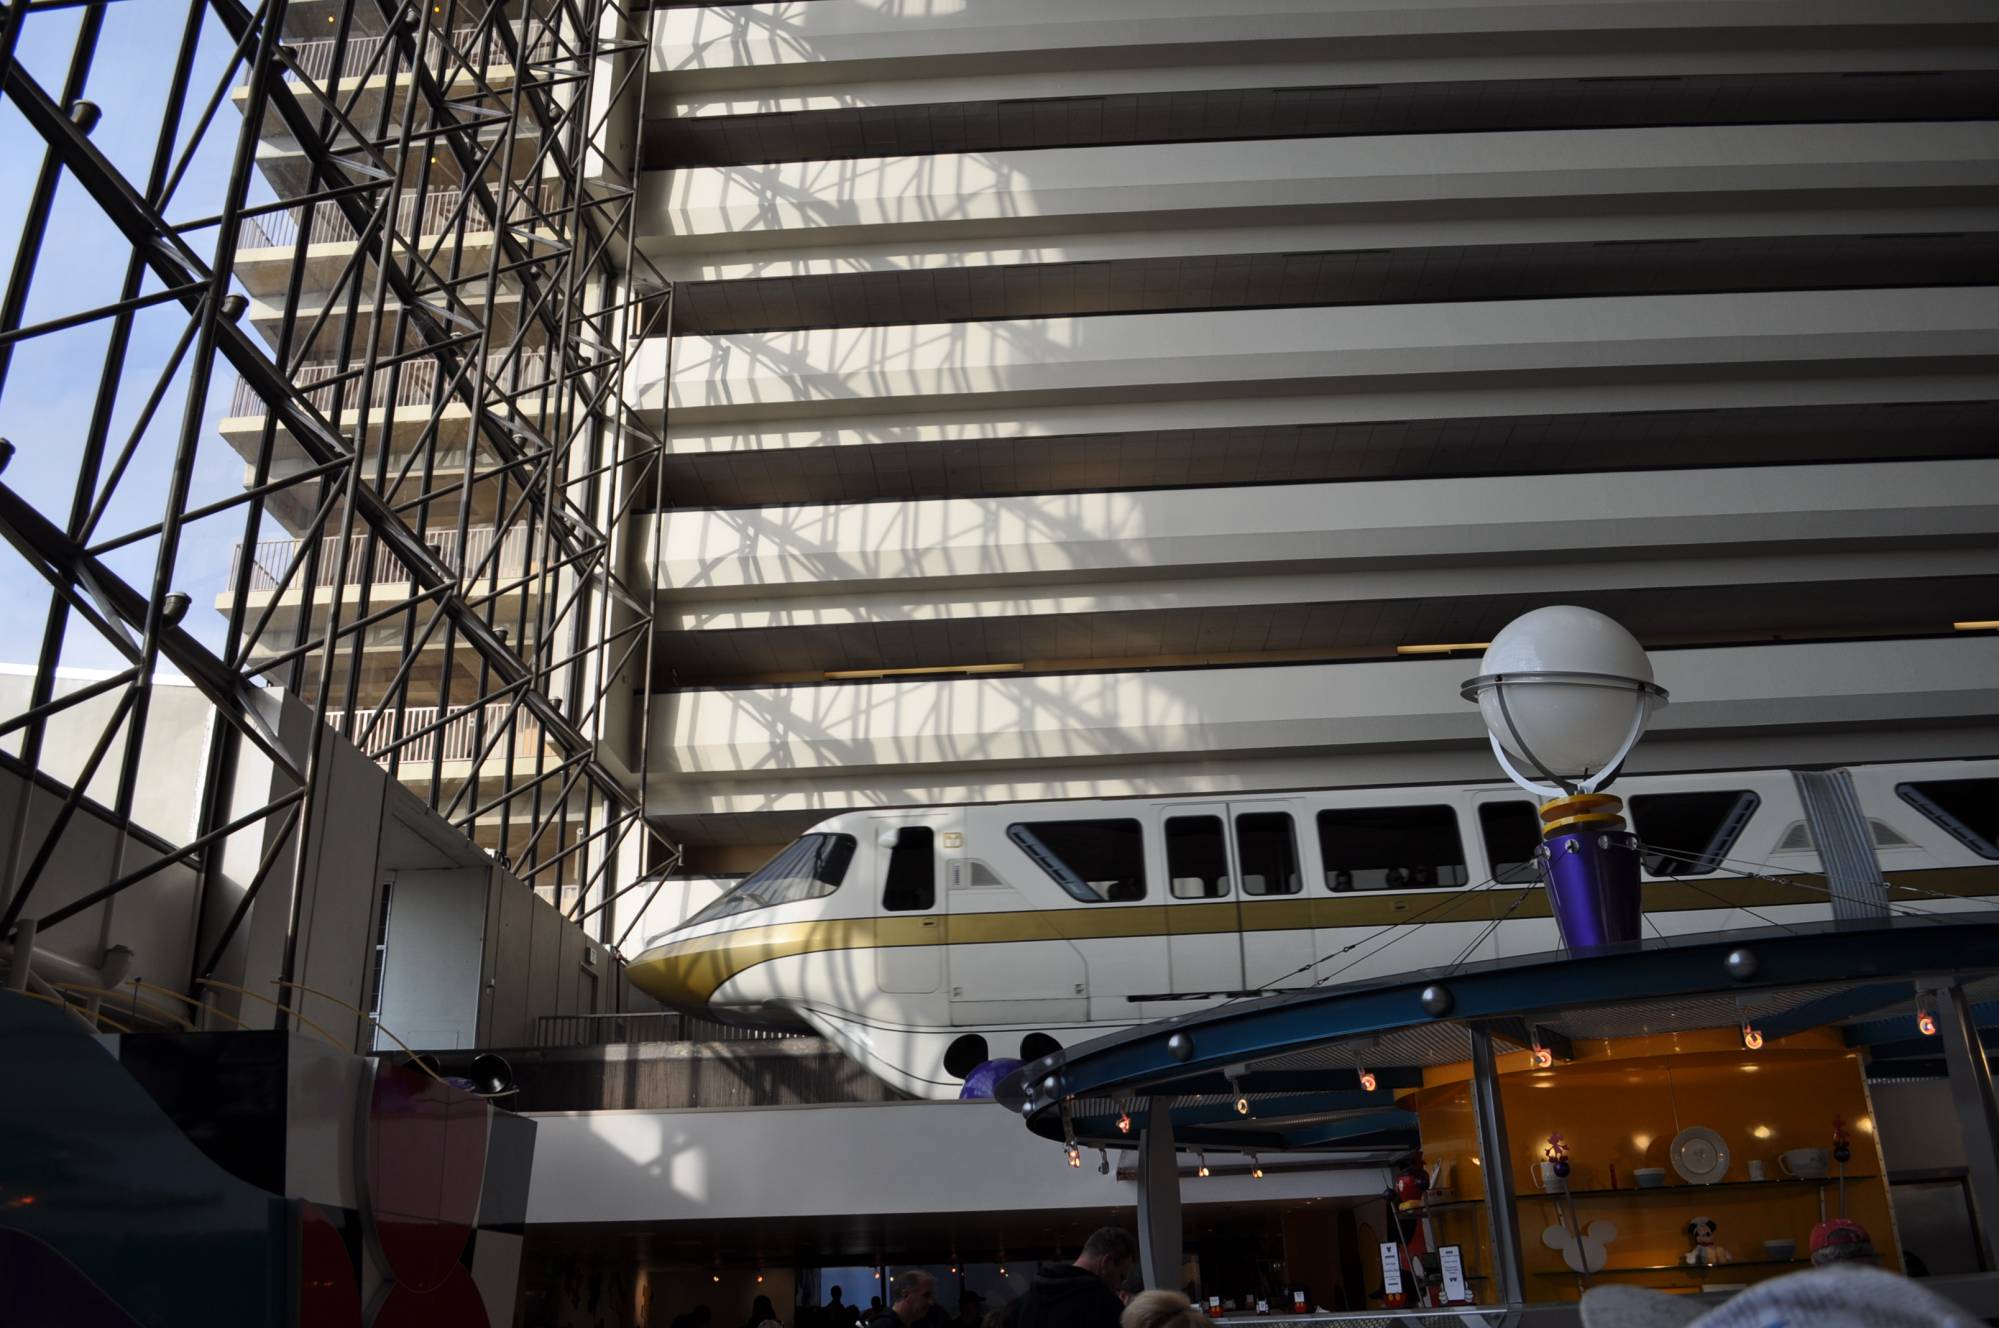 Monorail Going through the Contemporary